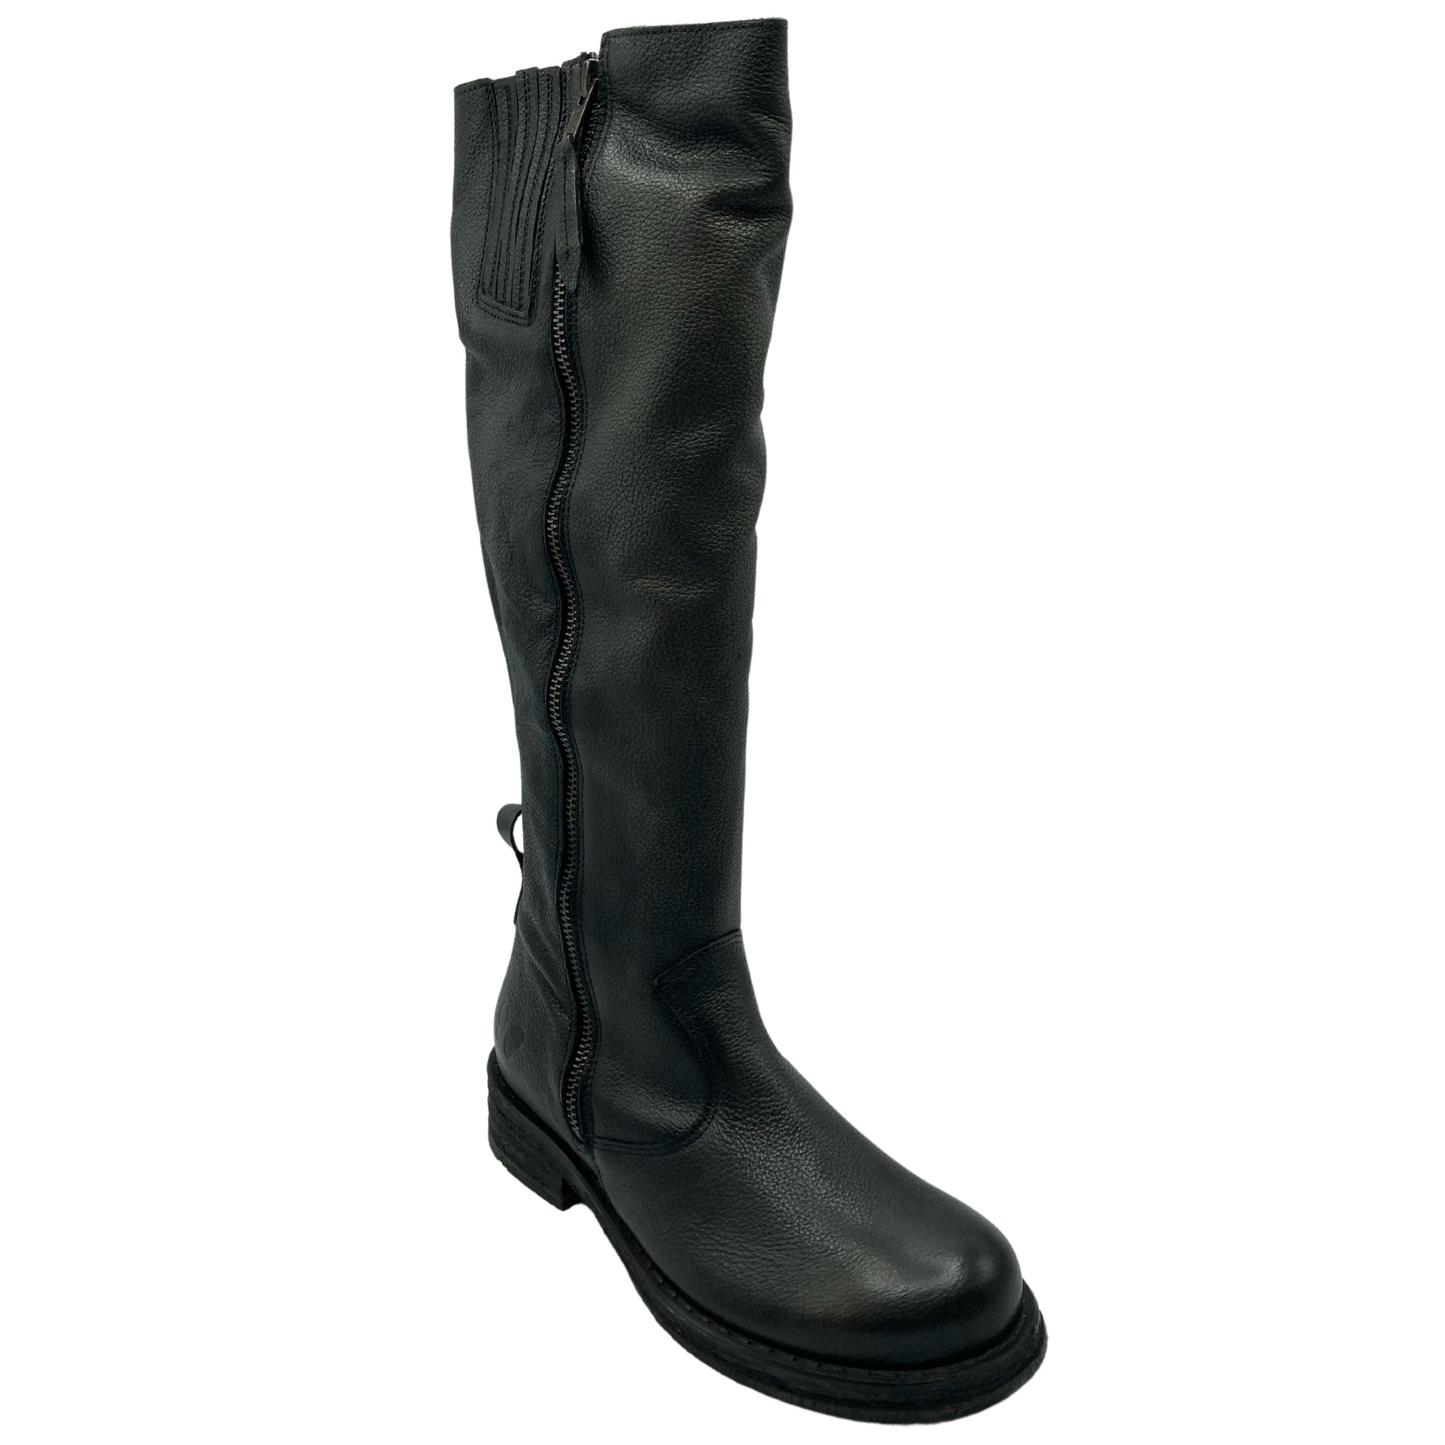 45 degree angled view of tall, grey, leather boot with rounded toe and zipper up the side of the shaft